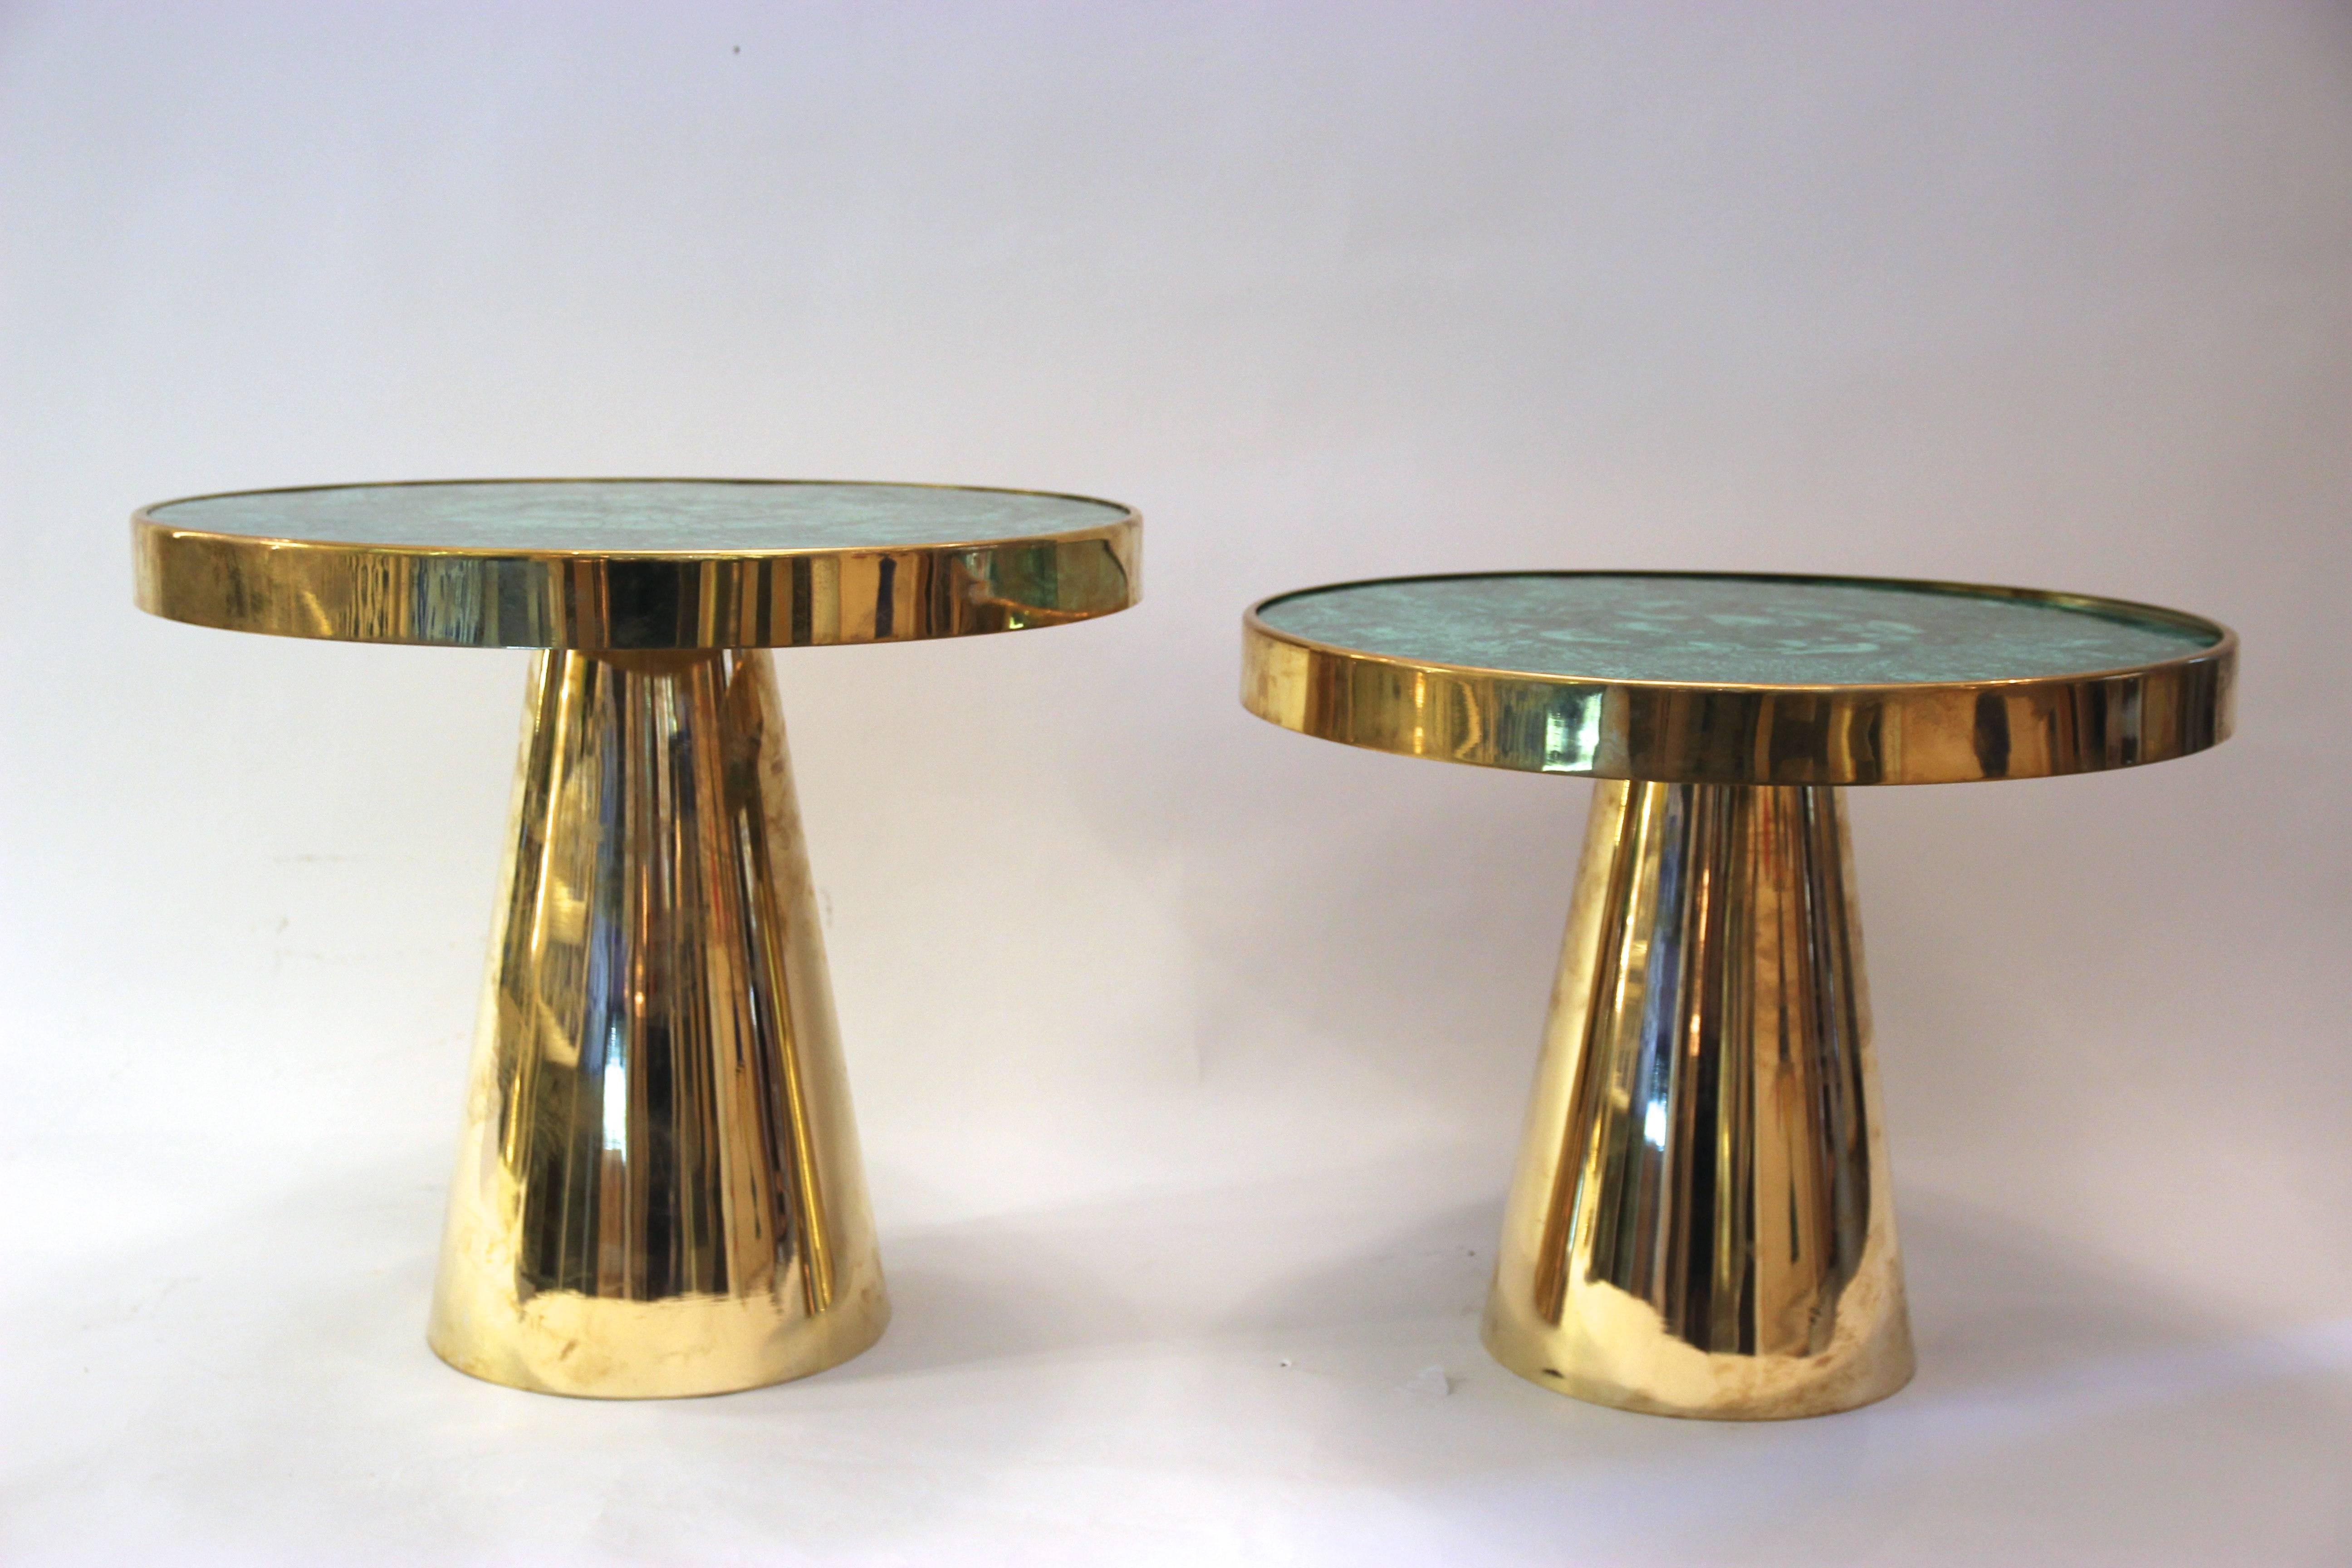 Pair of tables,
gold brass and top in semi-precious stone, malachite,
circa 2010, Italy.
Measures: The largest: Height: 52 cm, diameter 60 cm.
The smallest: Height: 46cm, diameter 58 cm.